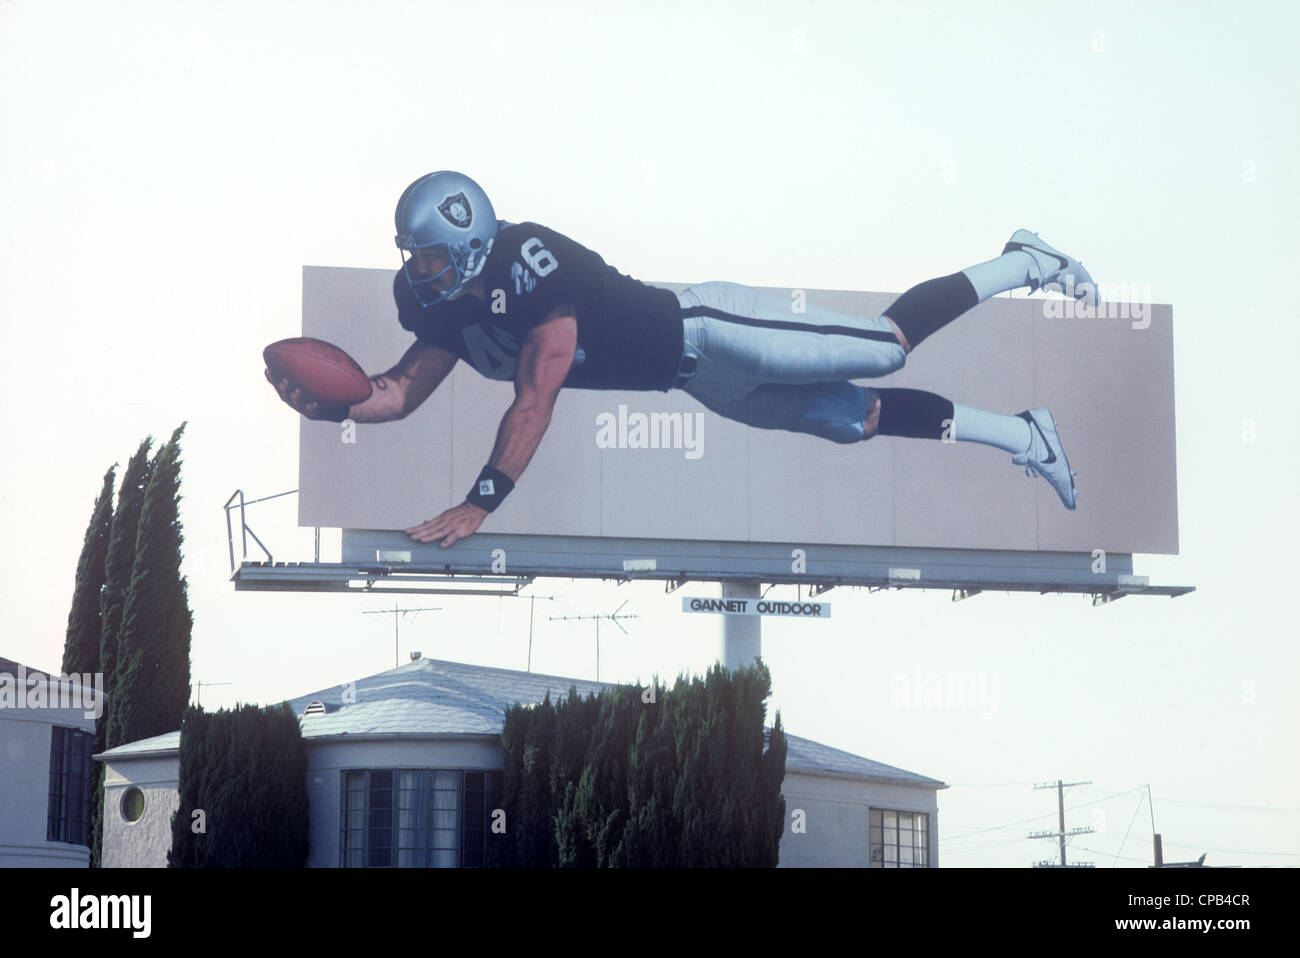 Nike billboard featuring L.A. Raiders player in Los Angeles, CA Stock Photo